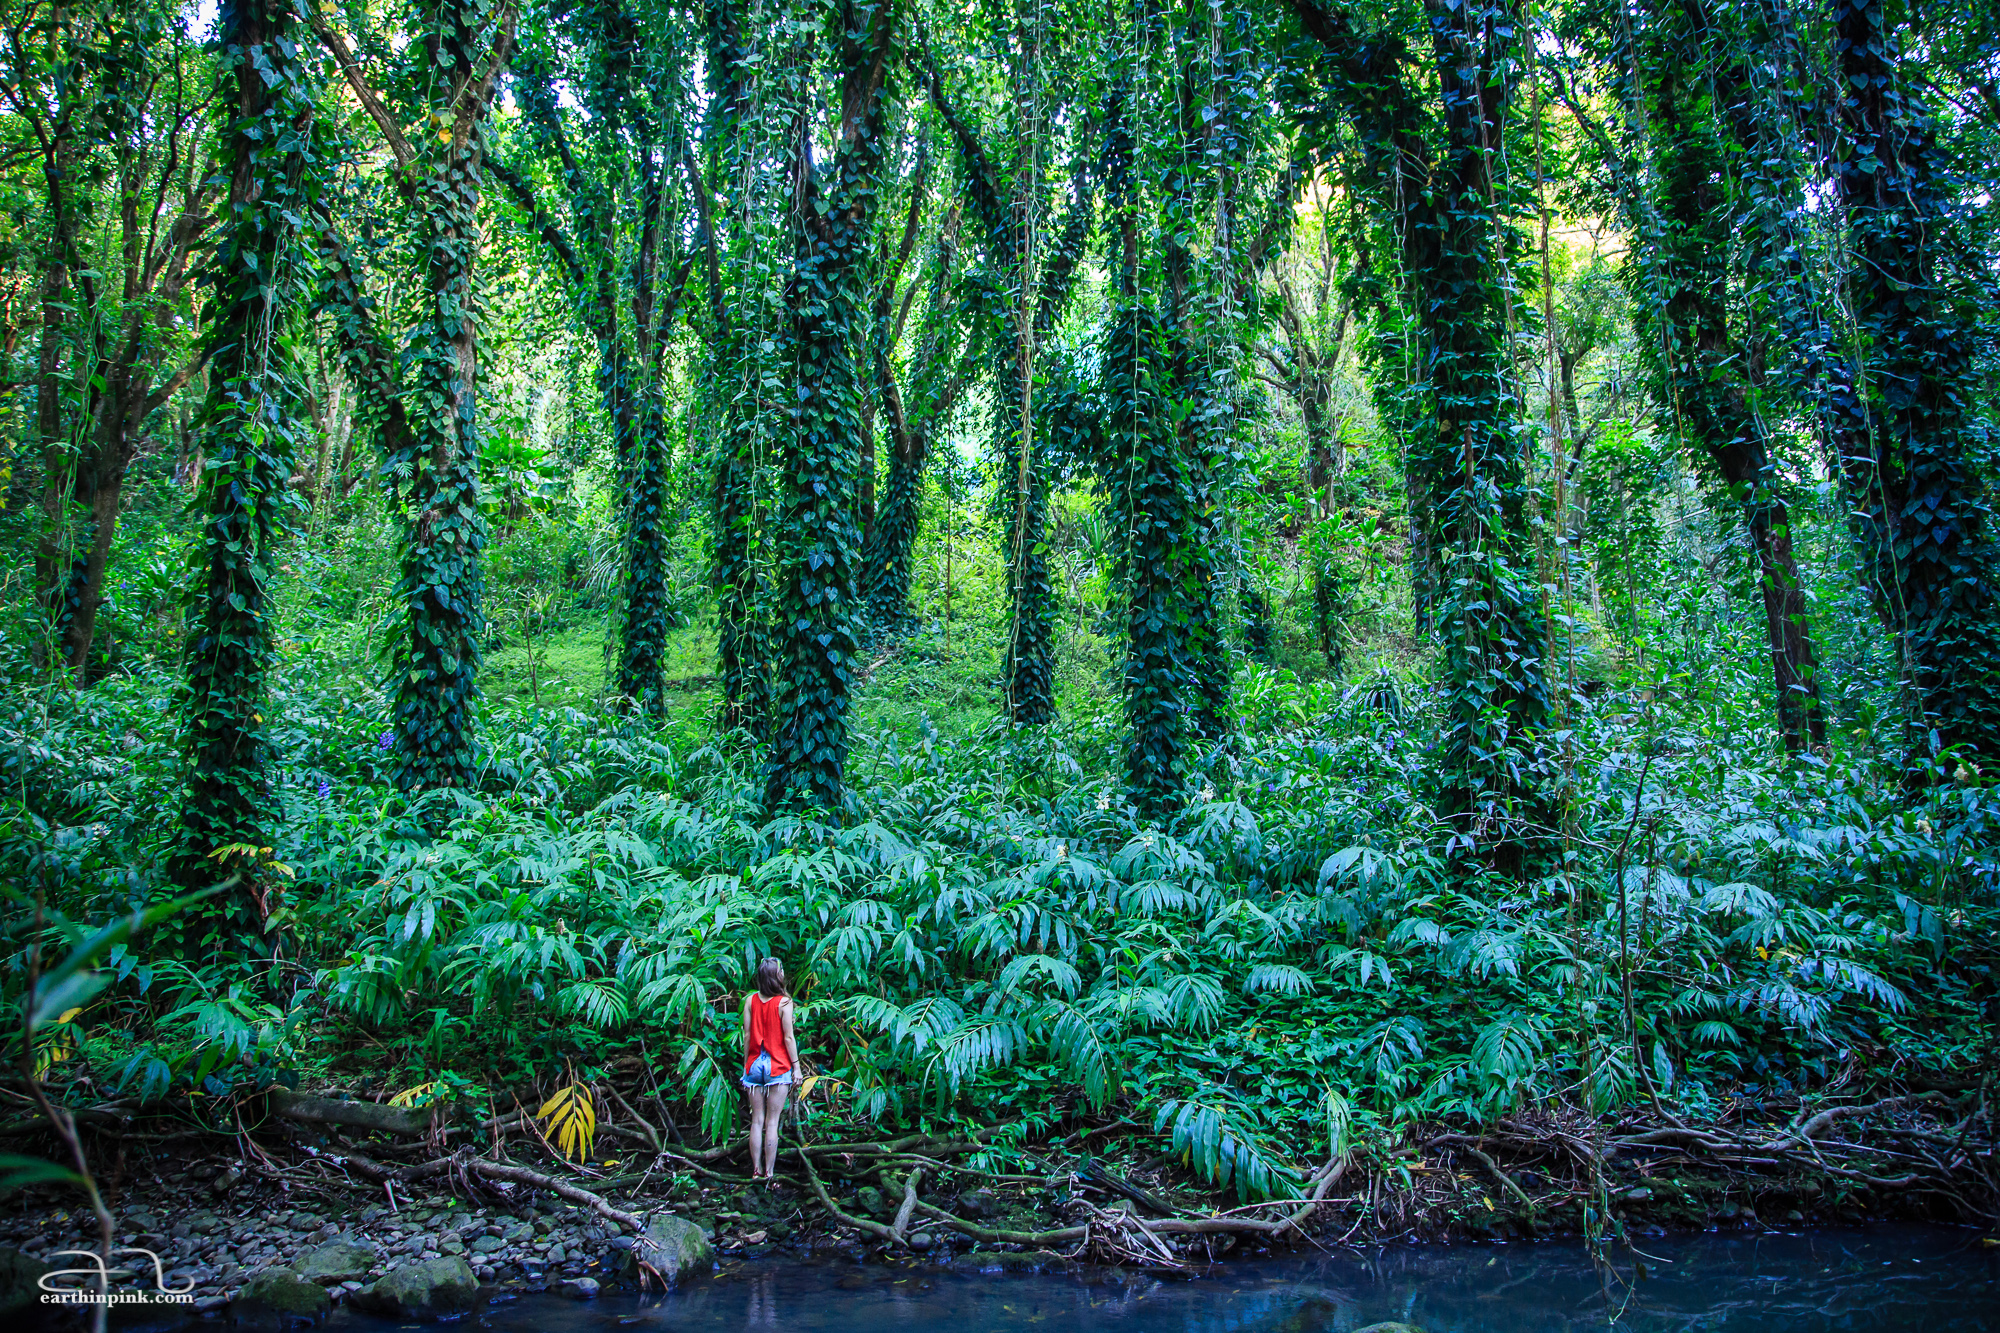 As we were photographing this lush tropical forest, Karim sent friend and talented model Caitlin Ahern across the little stream to add a sense of scale (and a splash of contrasting color) to the composition.